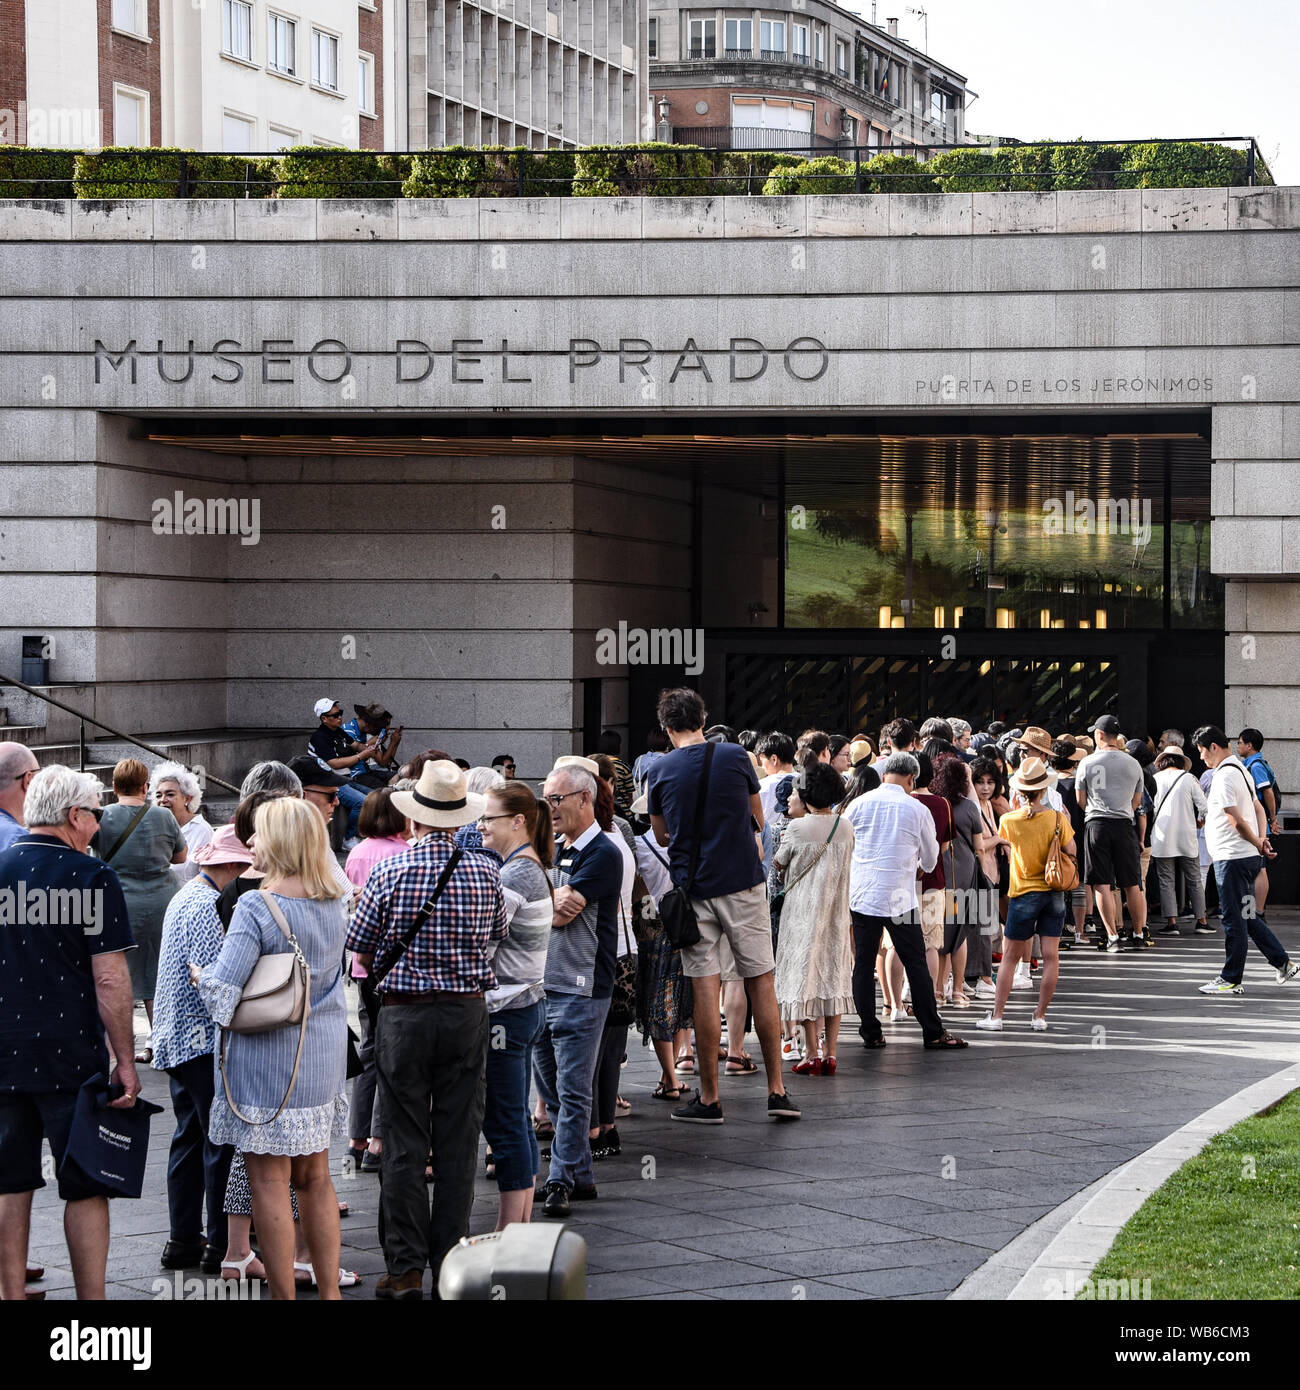 Madrid, Spain - July 21, 2019: Crowds gather at the entrance to Museo del Prado Stock Photo